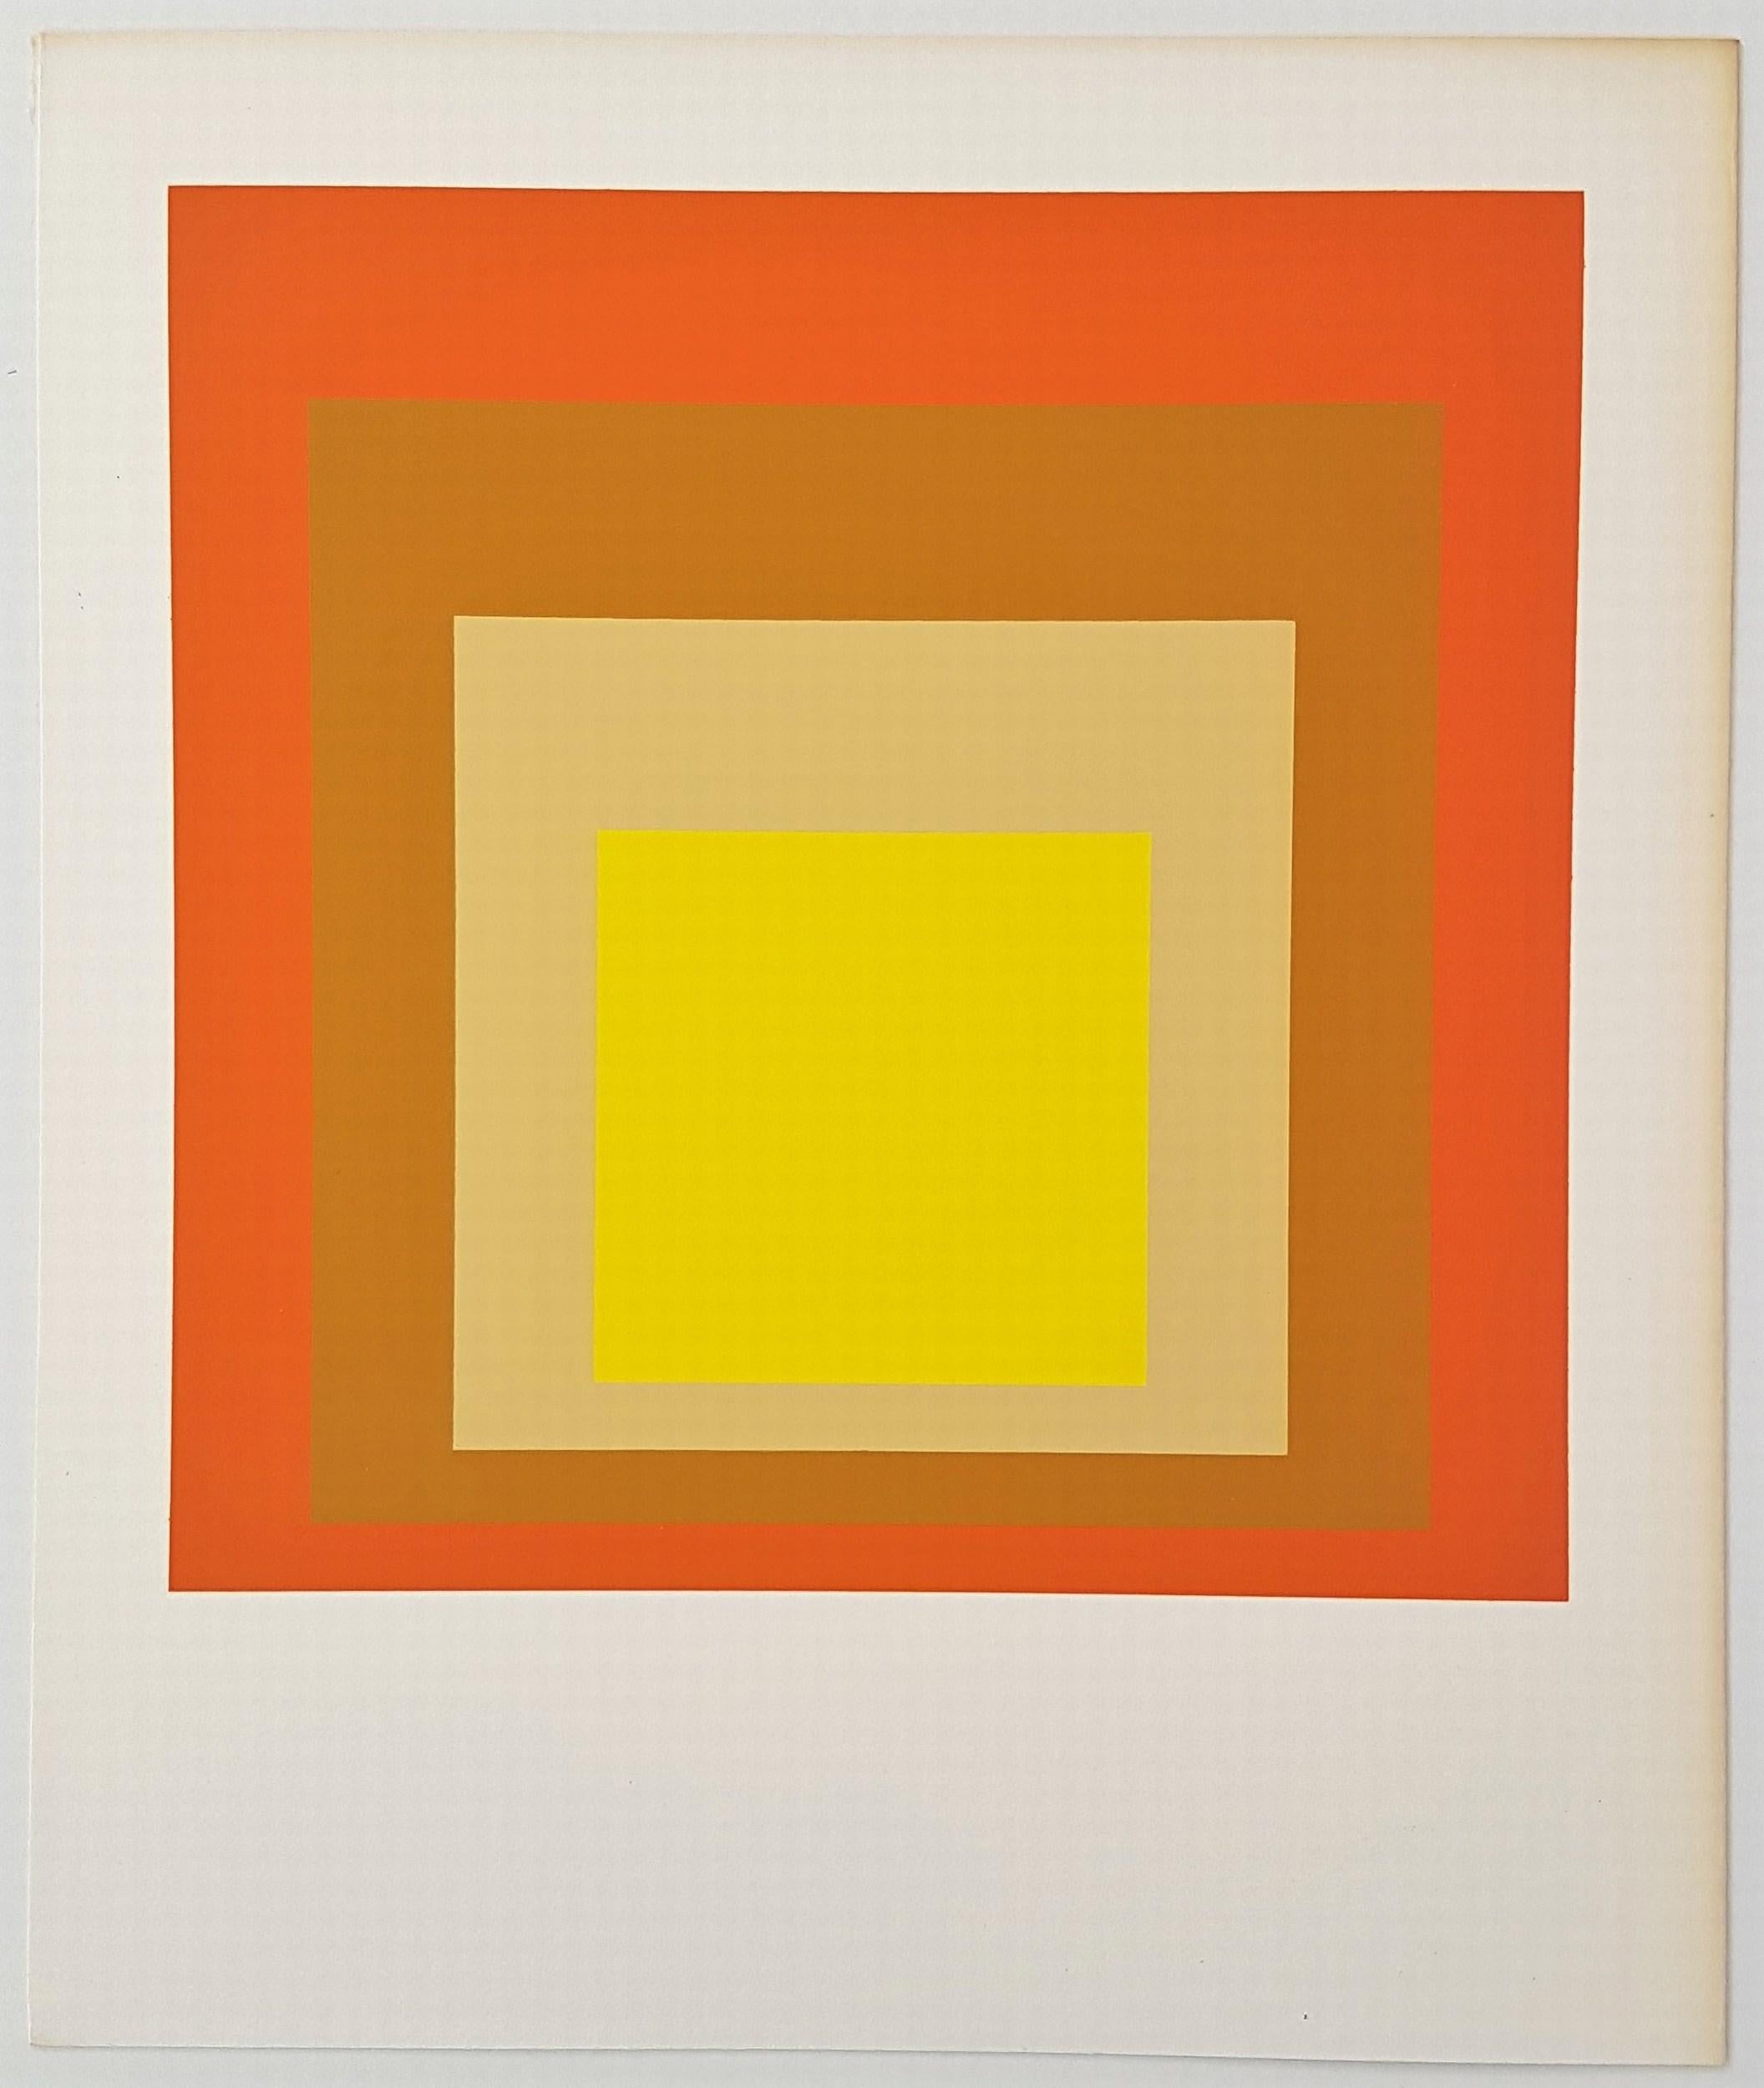 Homage to the Square: Yes Sir! (~28% OFF LIST PRICE - LIMITED TIME ONLY) - Print by (after) Josef Albers